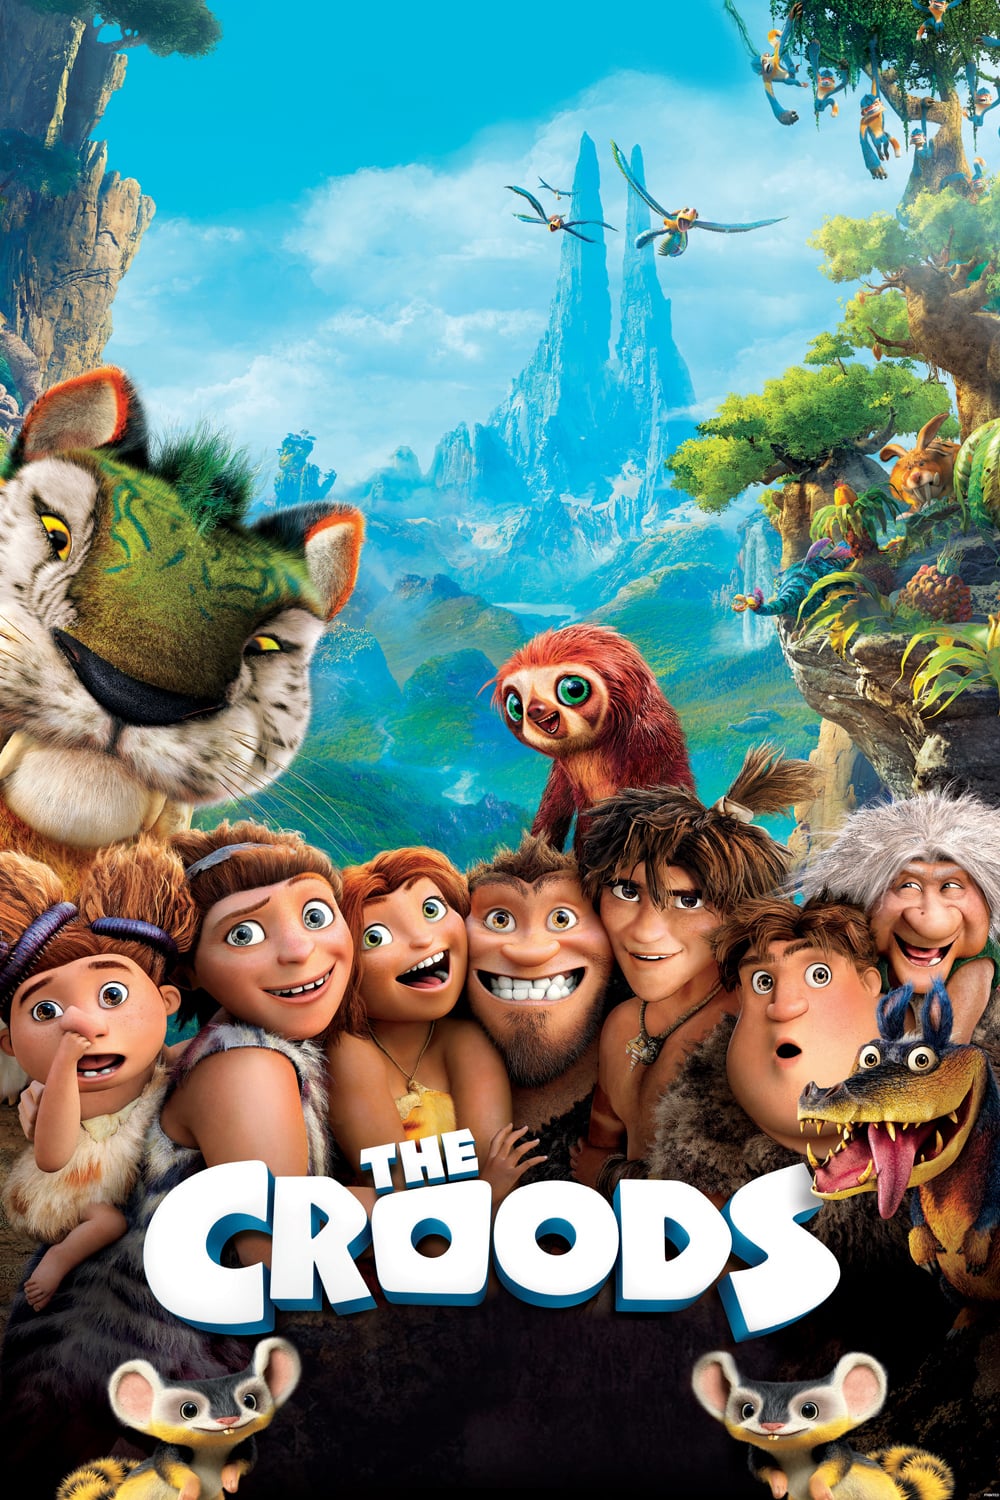 Croods Posters - poster film croods - croods movie poster - the croods - Los Croods